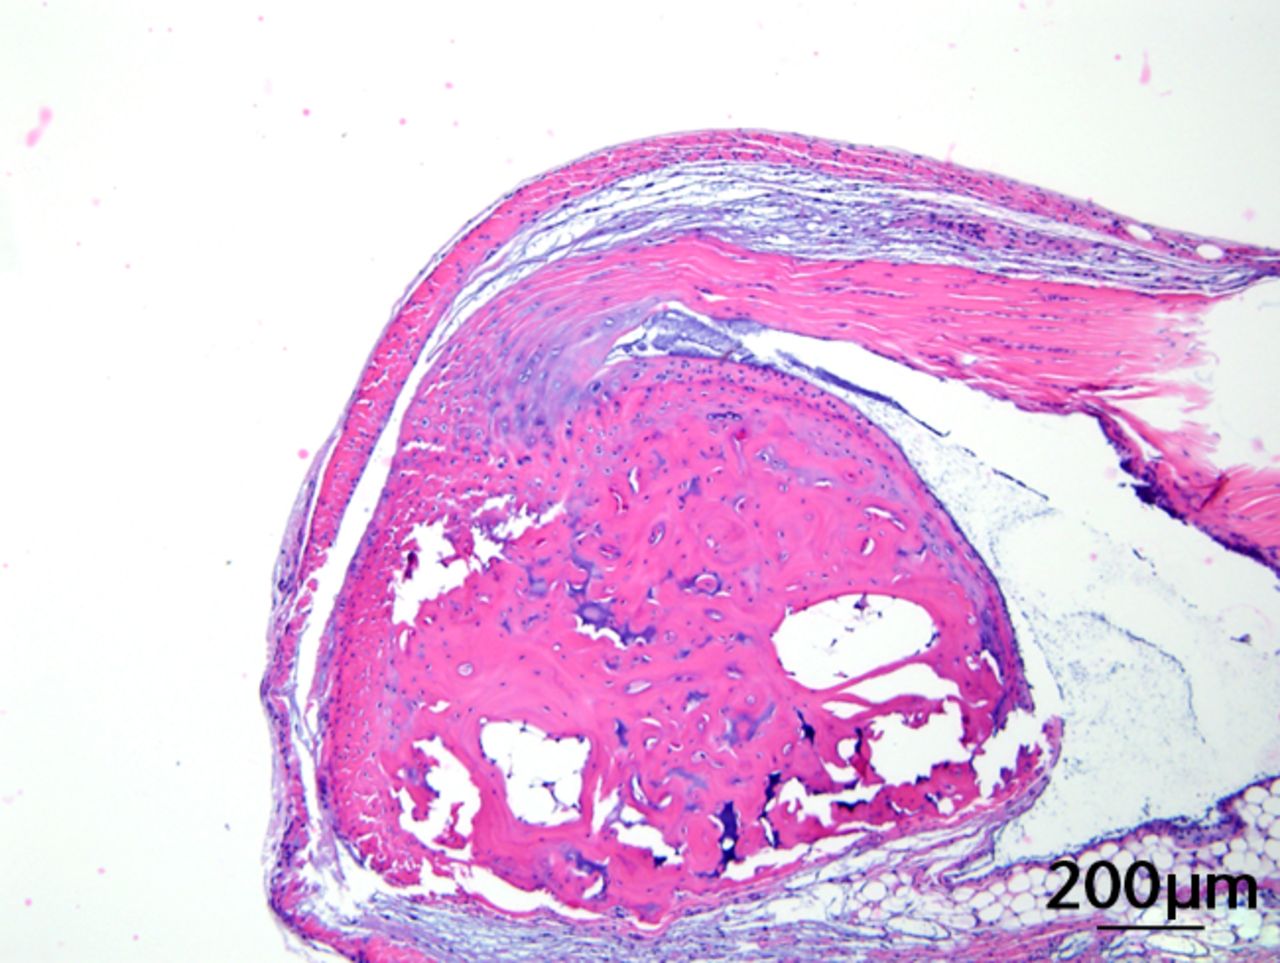 Figs. 3a - 3c 
            
              Figures 3a and 3b – histological
images of the Achilles tendon at insertion in a) a sedentary, control-diet
animal (neither high-fat diet (HFD) nor branched-chain amino acid
(BCAA)), and b) in an exercise (Ex), HFD and BCAA treated mouse
(both haematoxylin &
 eosin, bar 200 µm). Figure 3c – bar chart
showing the mean quadriceps muscle fibre diameter measured following
tissue collection. Groups not sharing a letter (‘a’ or ‘b’) are
significantly different, based on a significant main effect for
exercise and no other significant main effects or interactions.
Error bars indicate standard deviation.
          